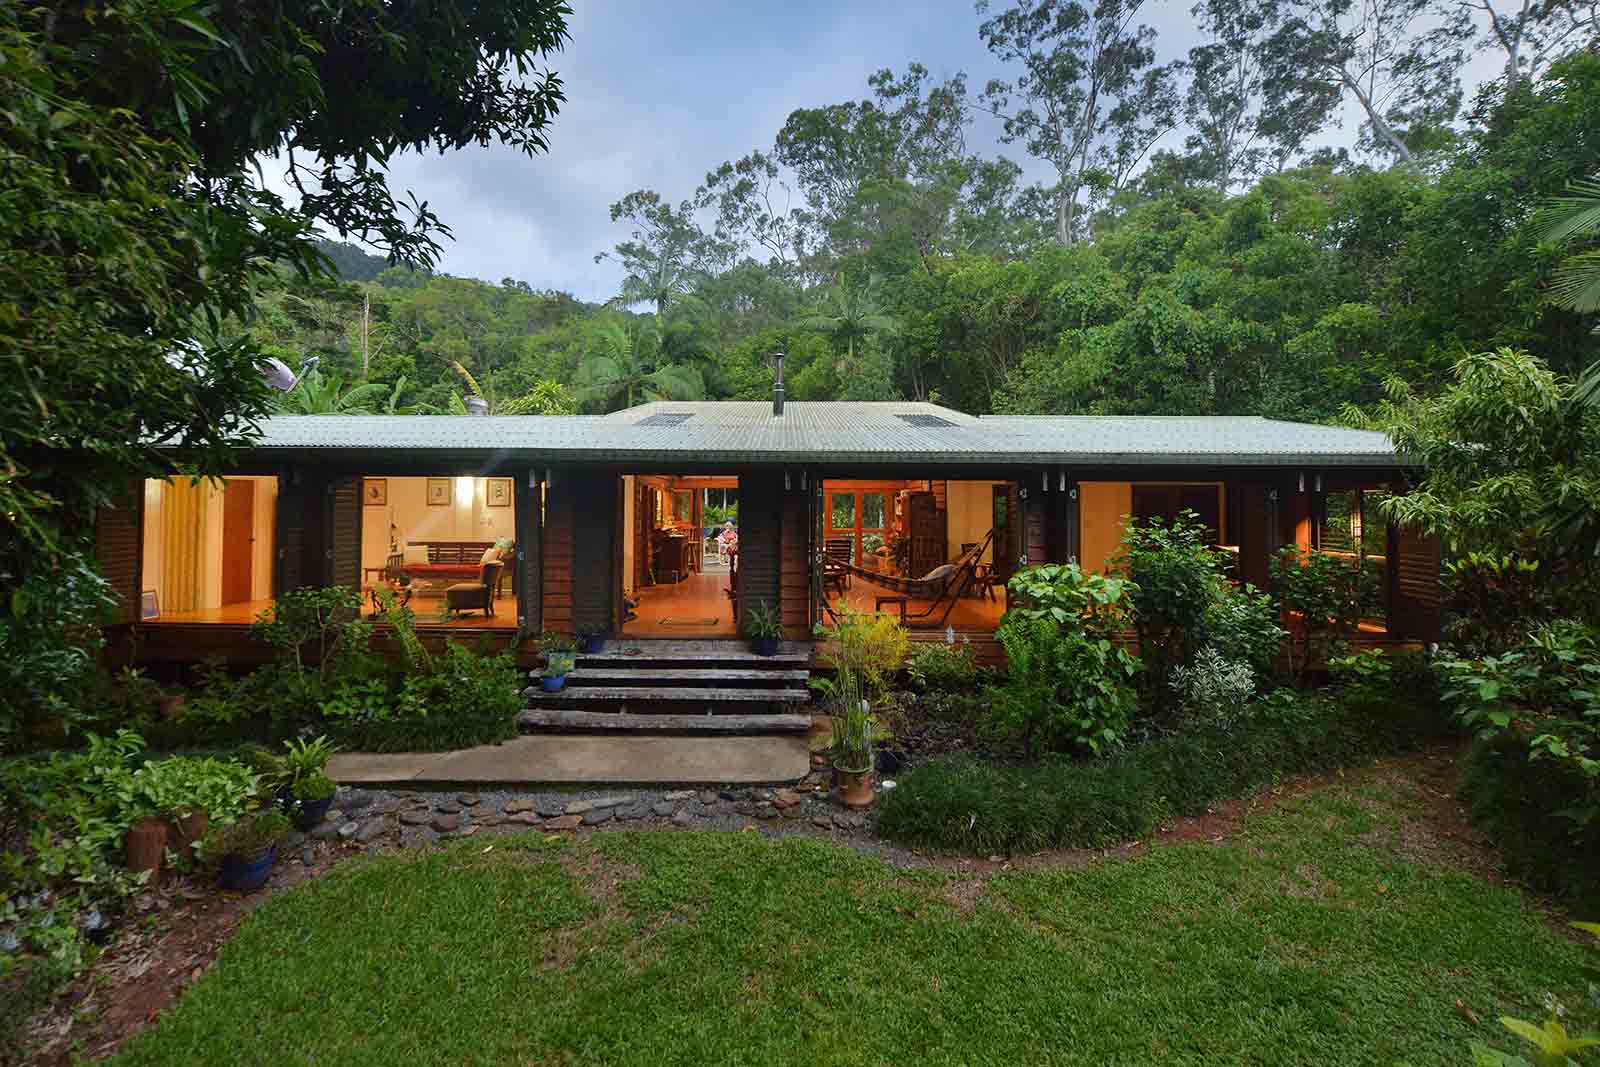 Cow Bay homestay, between Daintree River and Cape Tribulation | Reef to rainforest by road